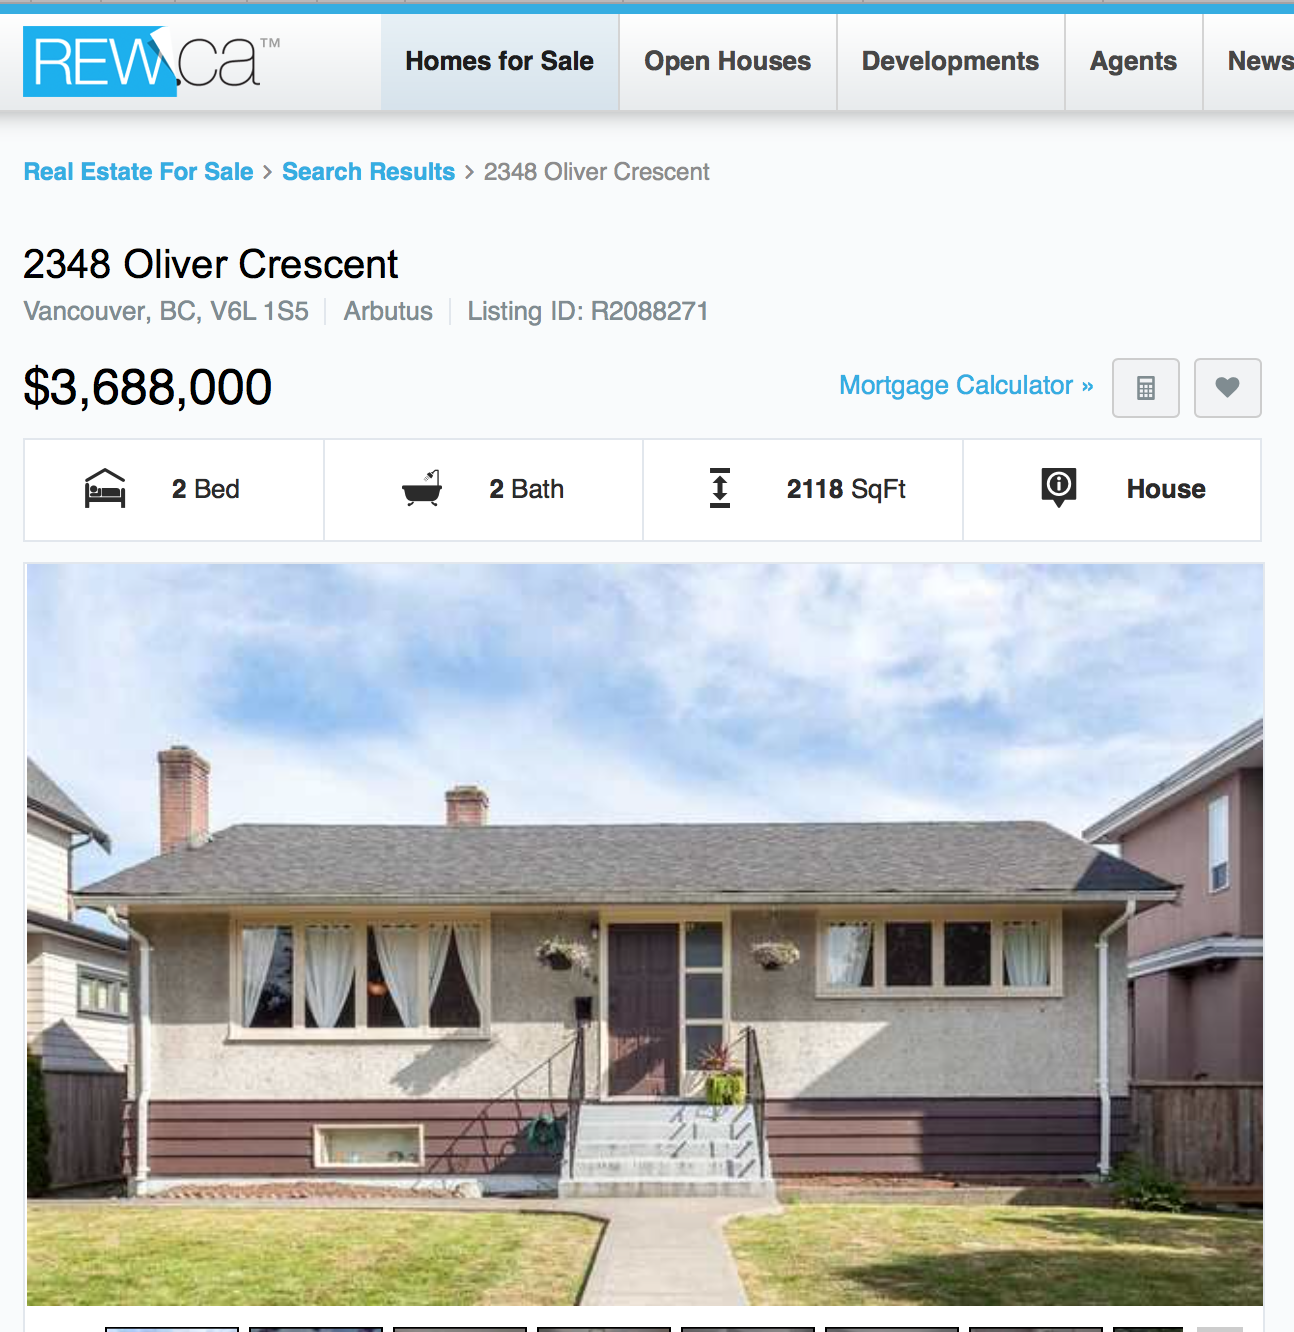 Vancouver house listed for $3,688,000